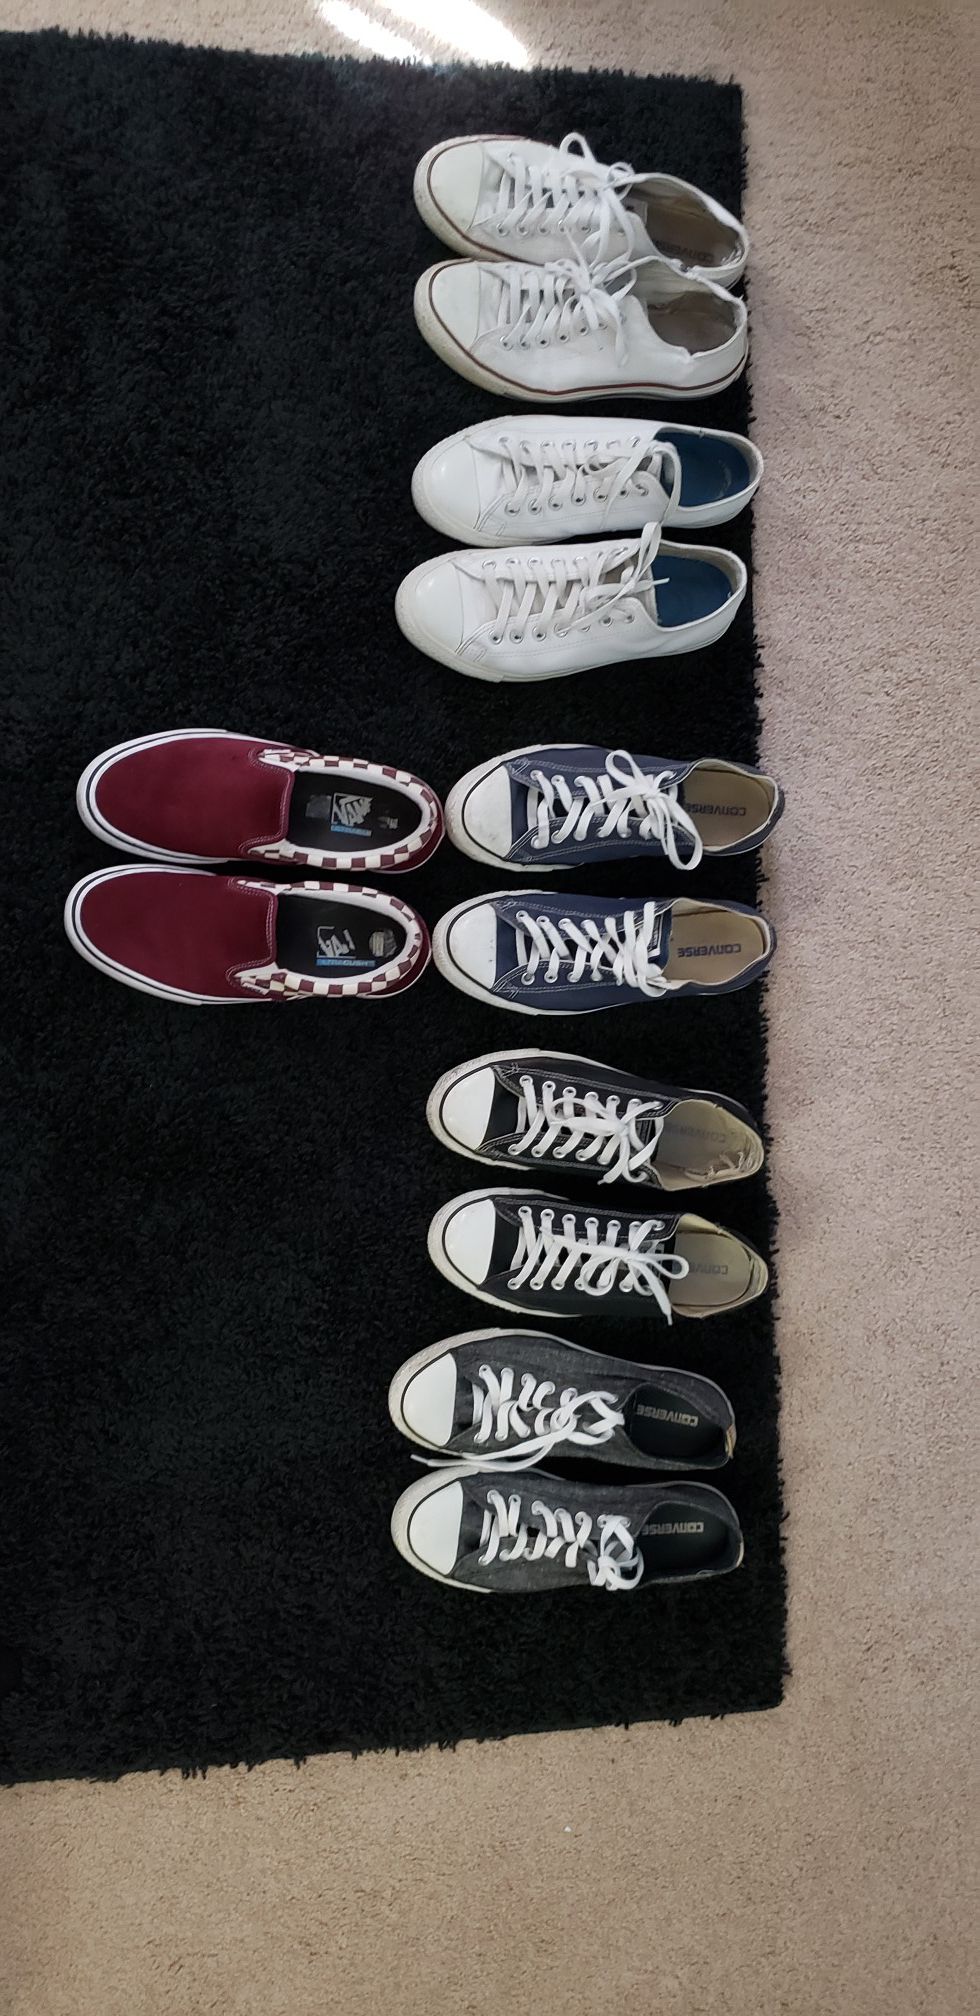 Converse and vans